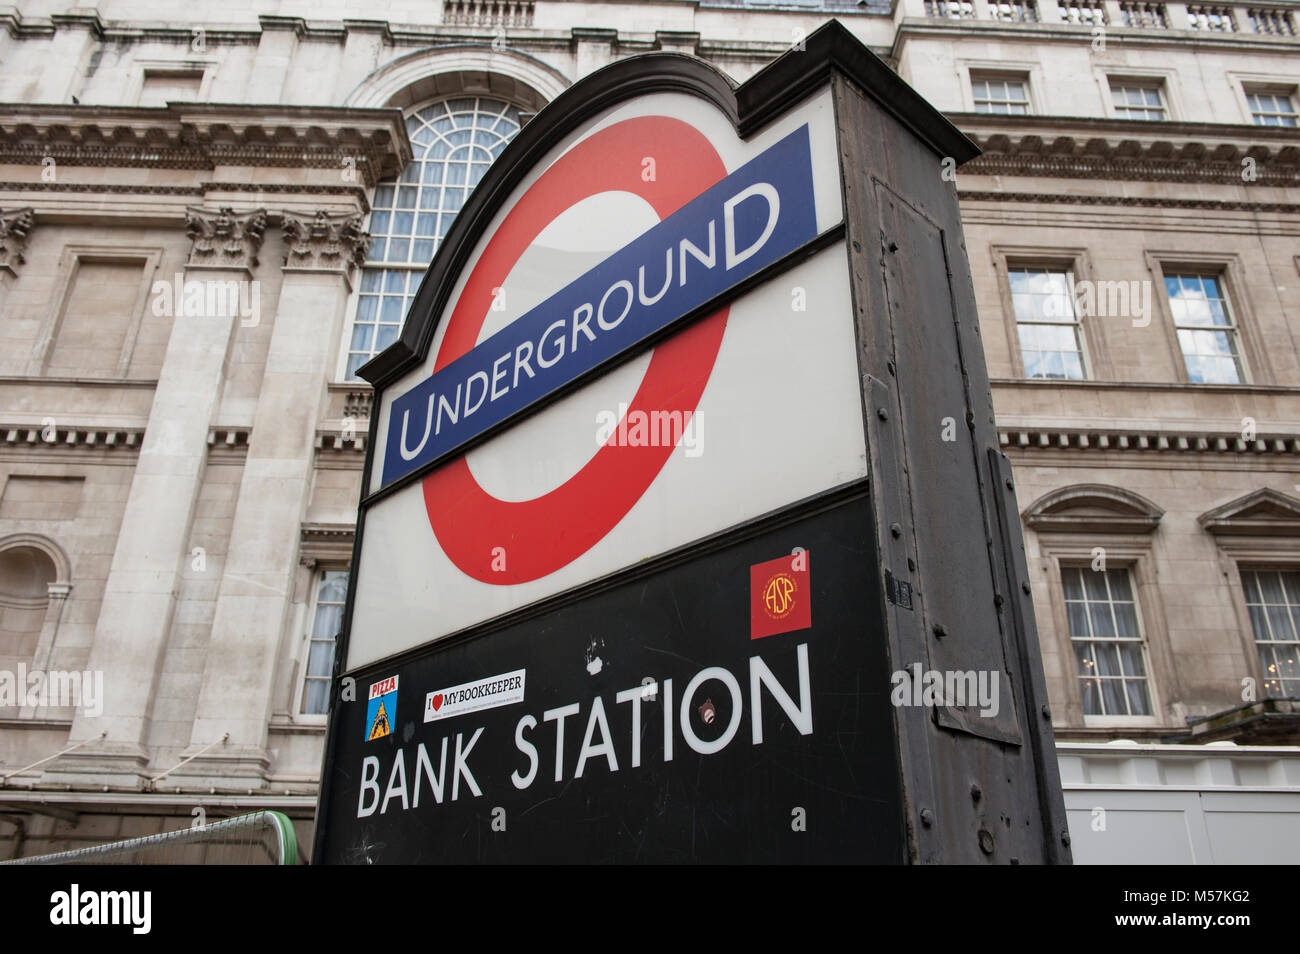 A sign for Bank Station in central London, England Stock Photo